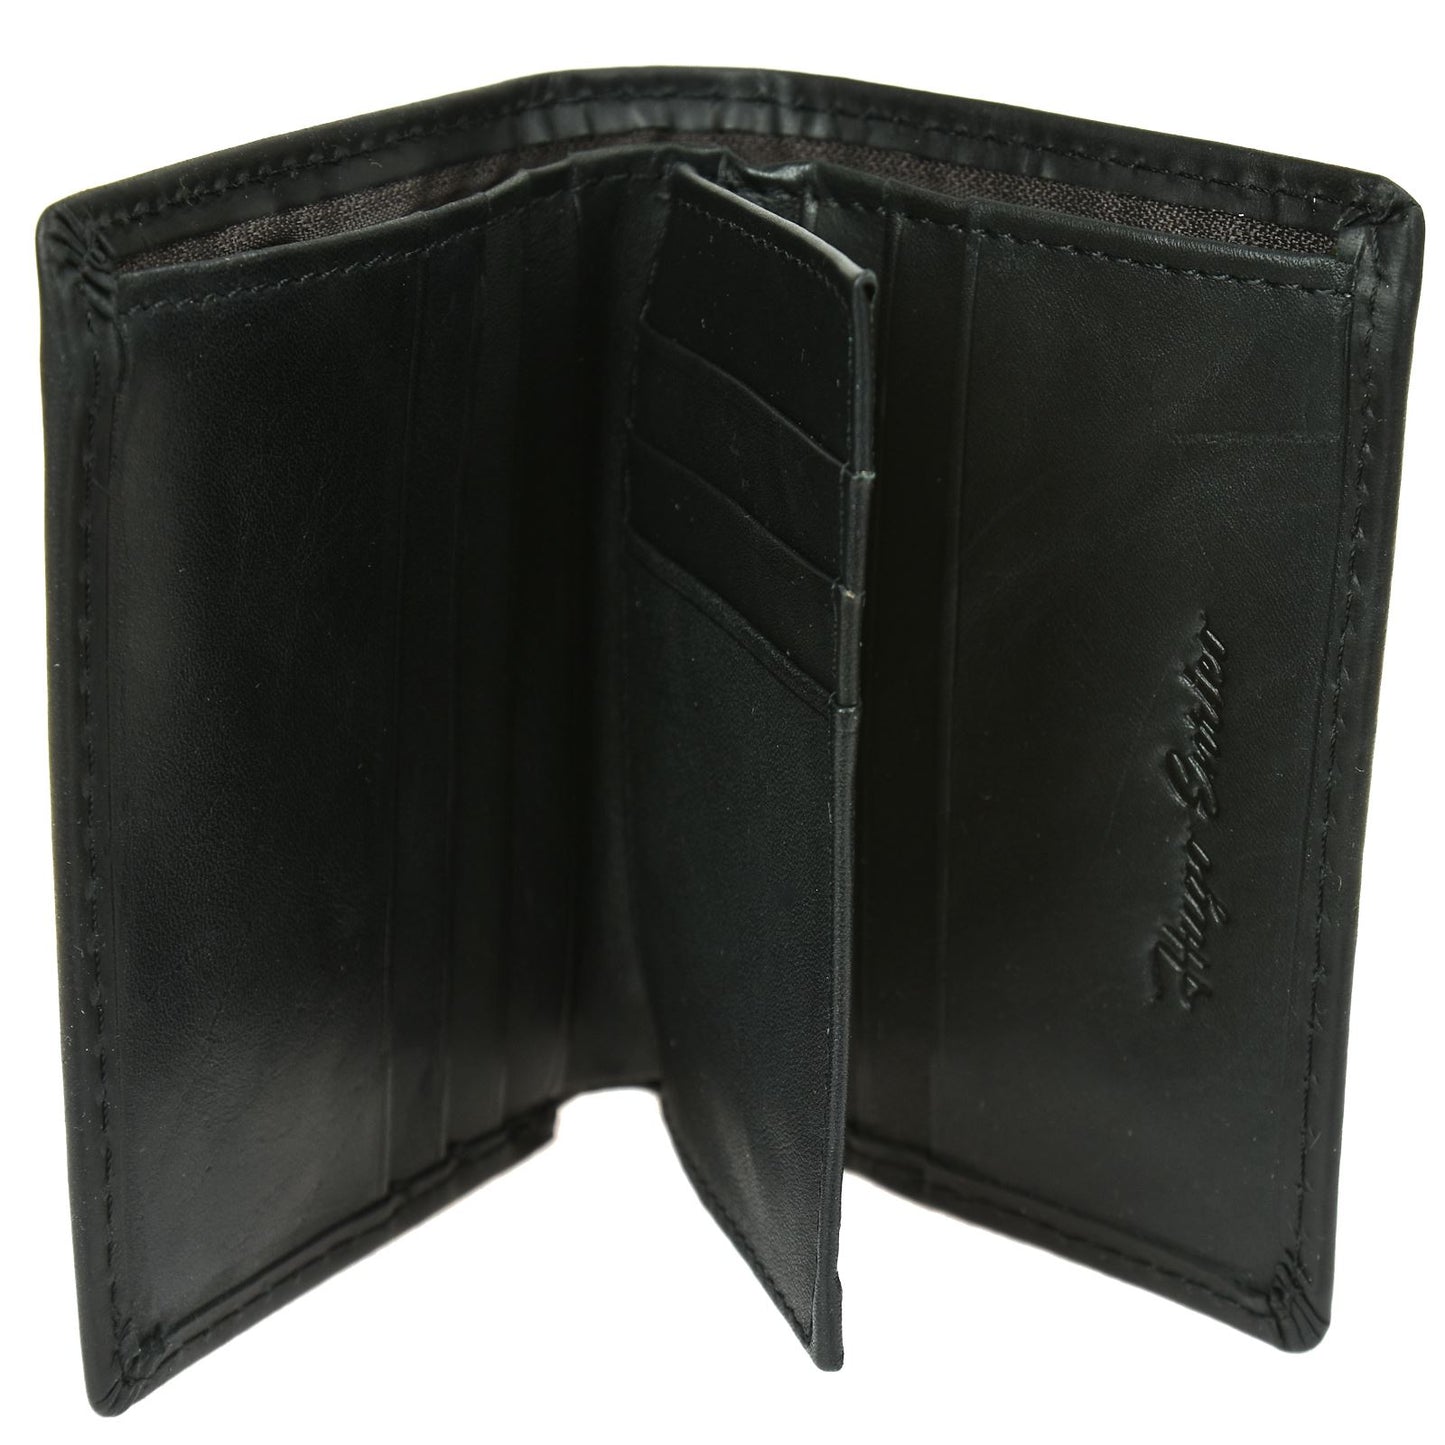 Fold Your Cash in Style with a Hugo Enrico Wallet